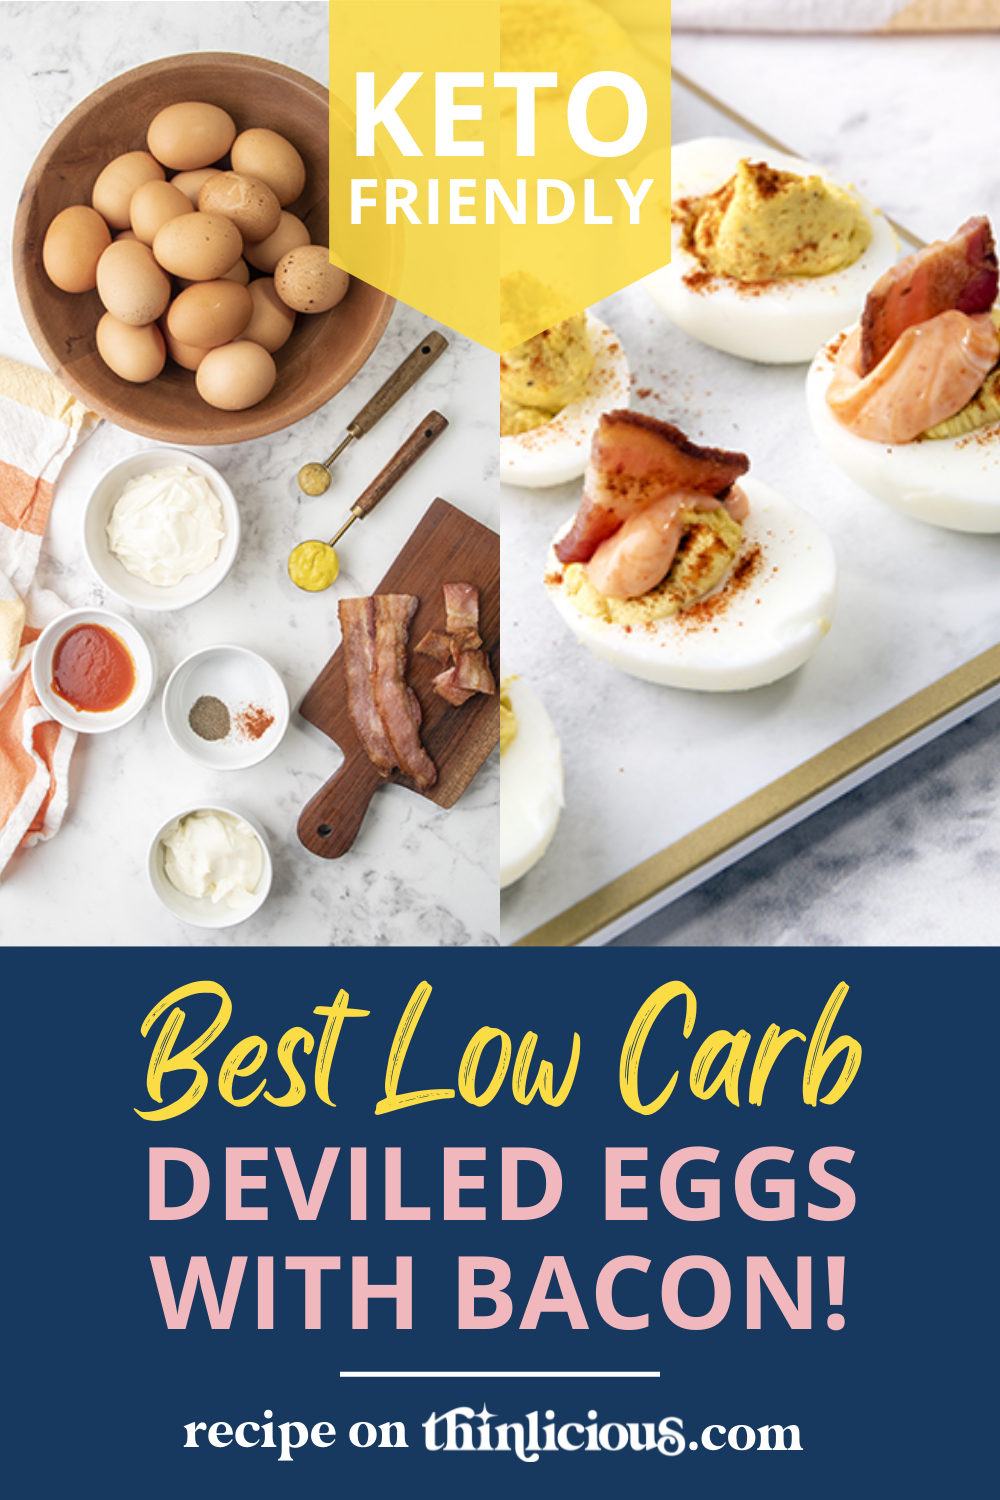 The Best Low Carb Deviled Eggs (with Bacon!) - Thinlicious